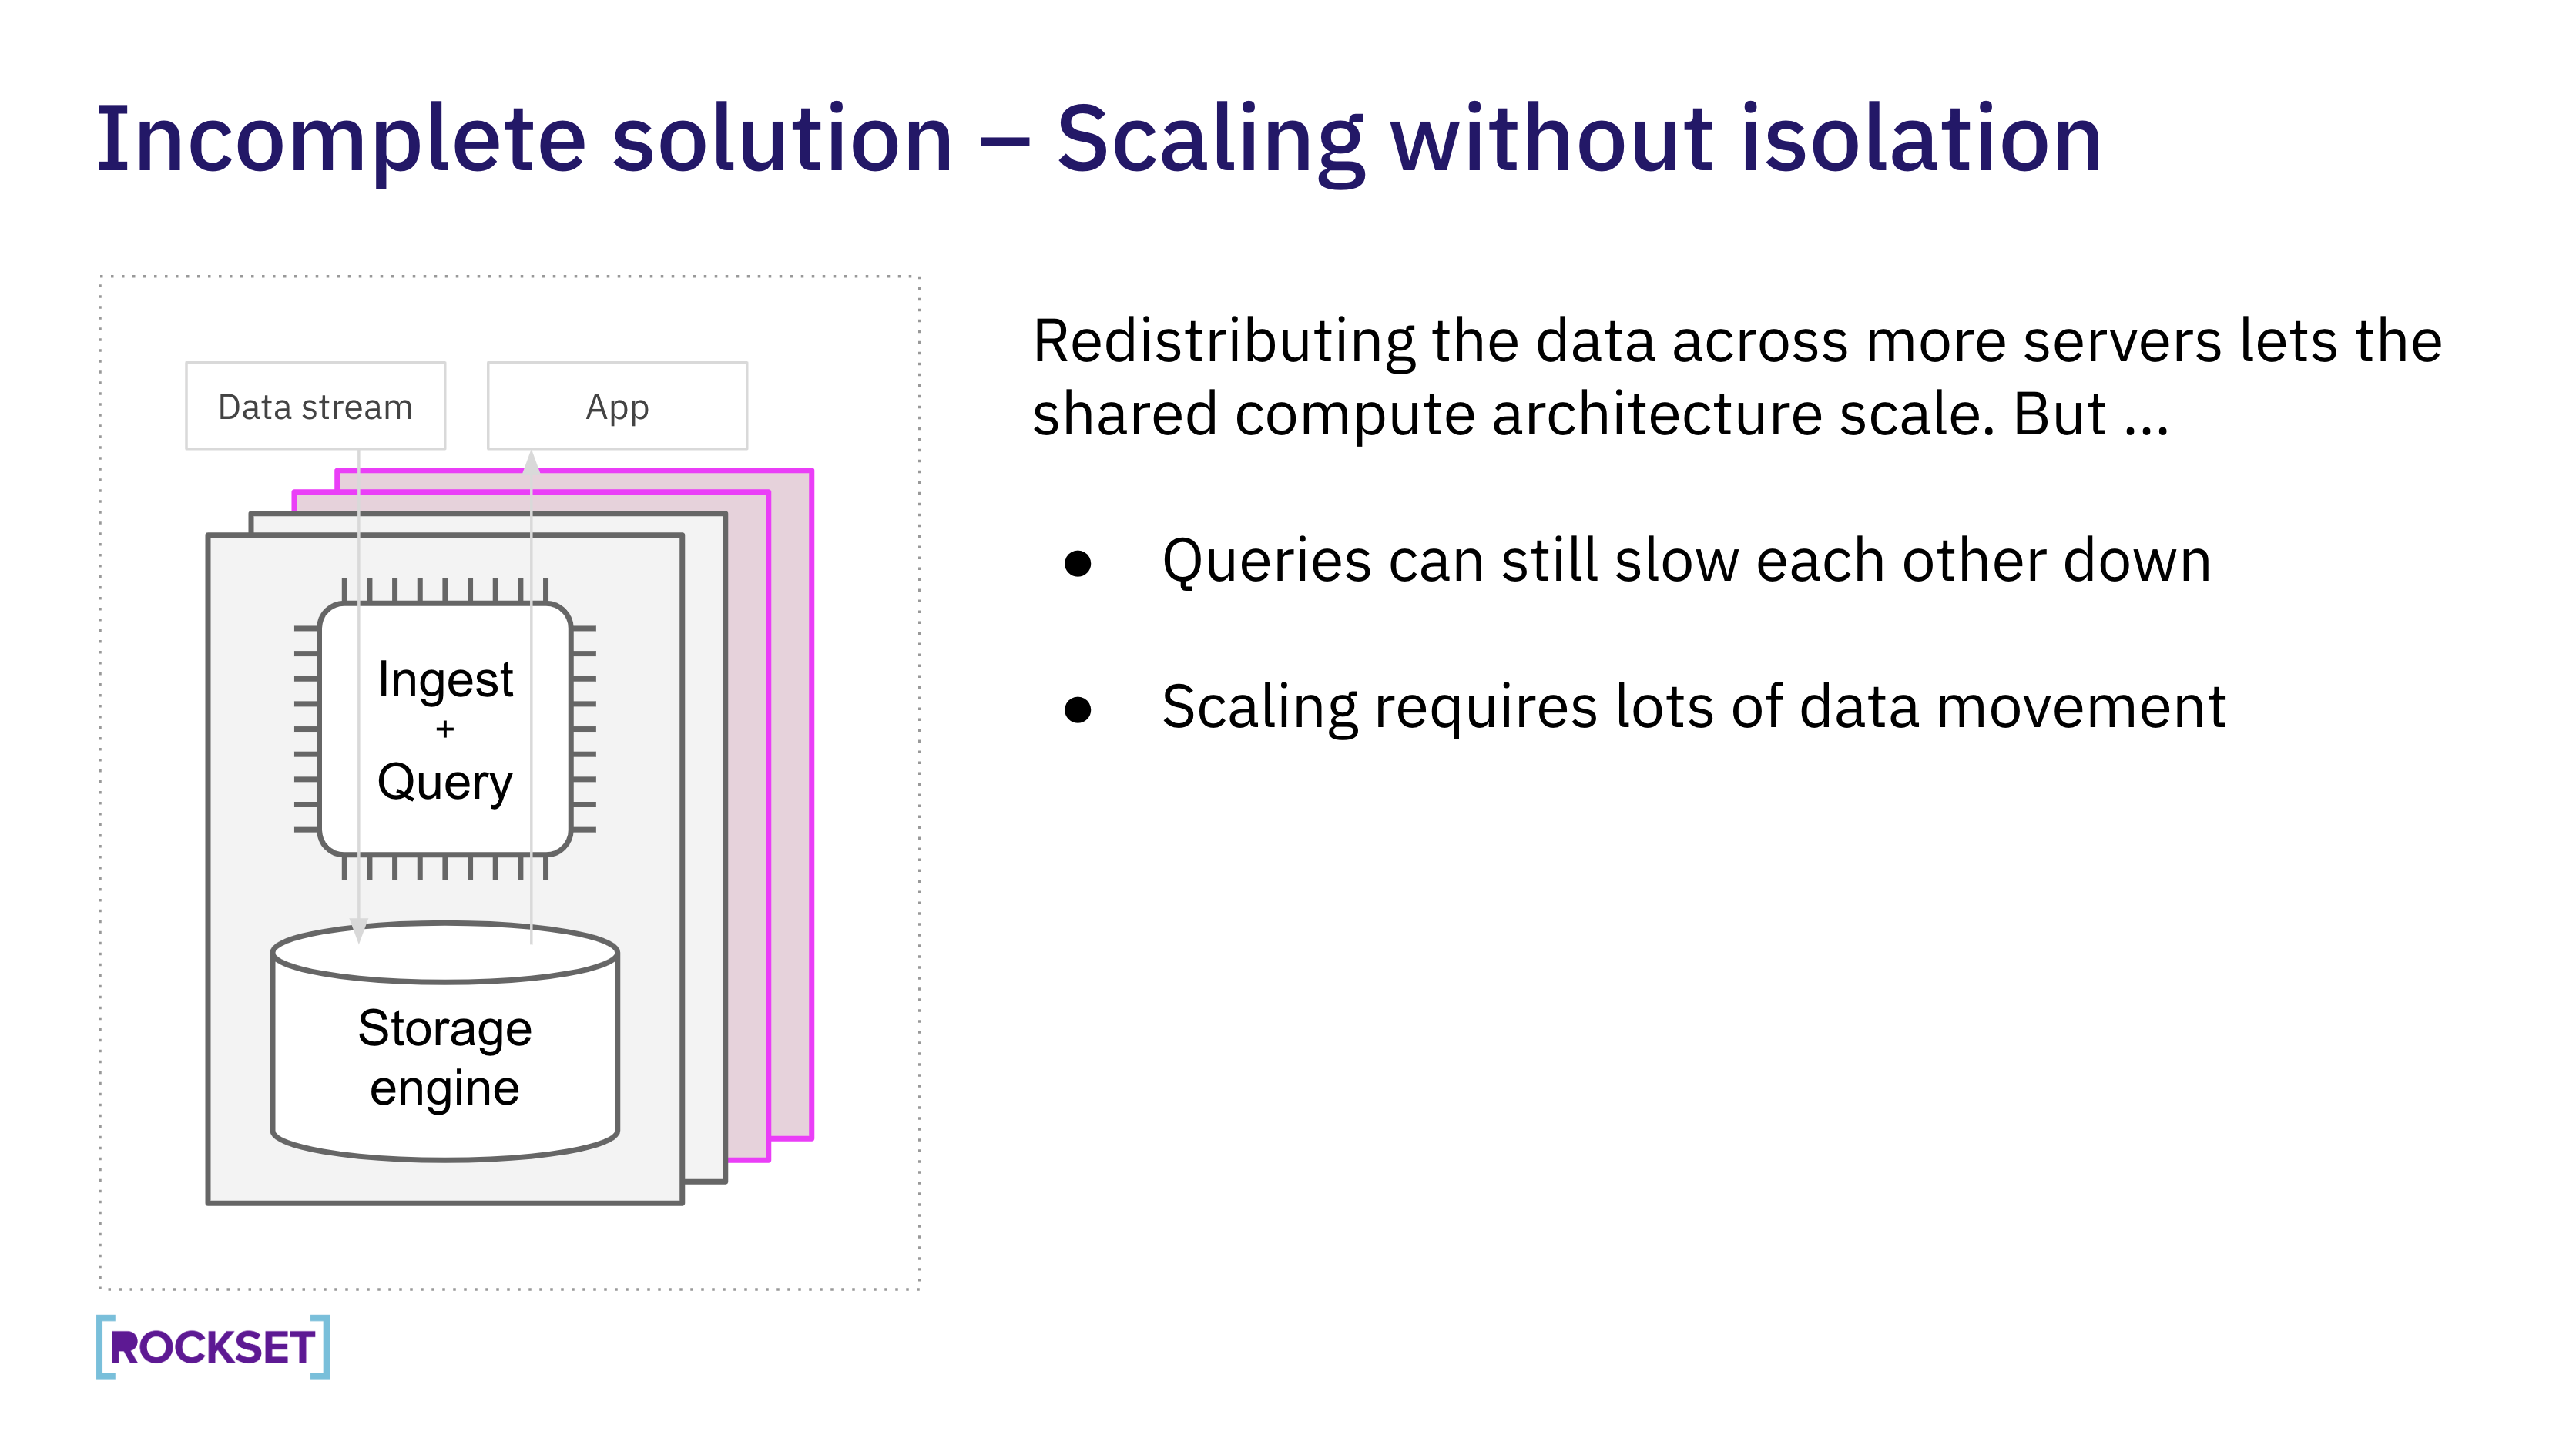 Incomplete solution- Scaling without isolation